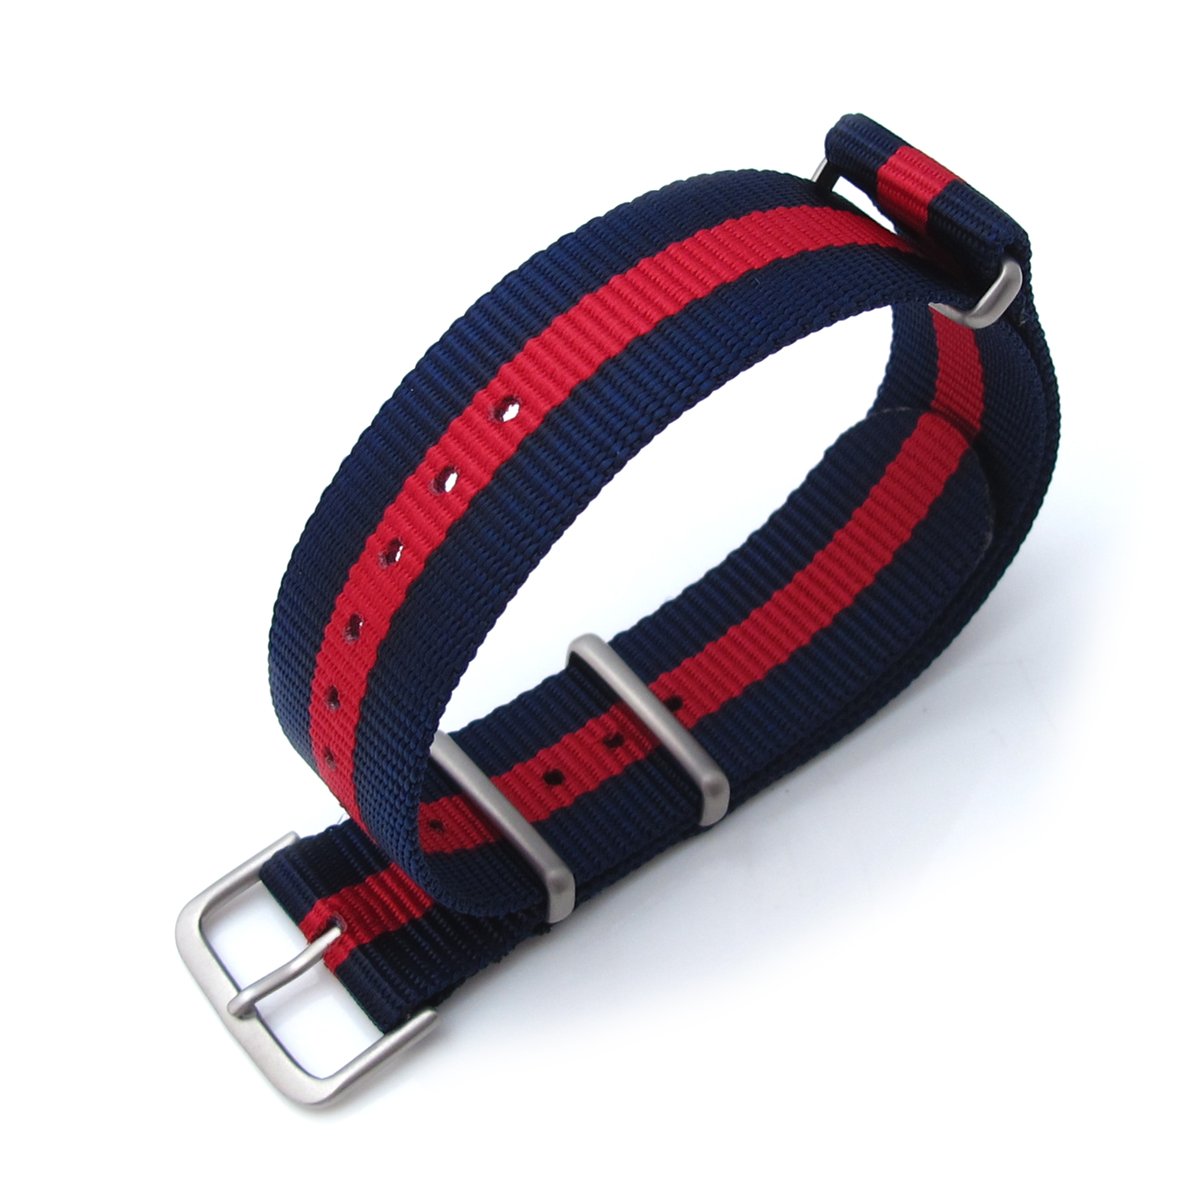 MiLTAT 20mm G10 military watch strap ballistic nylon armband Brushed Red &amp; Blue Stripes Strapcode Watch Bands